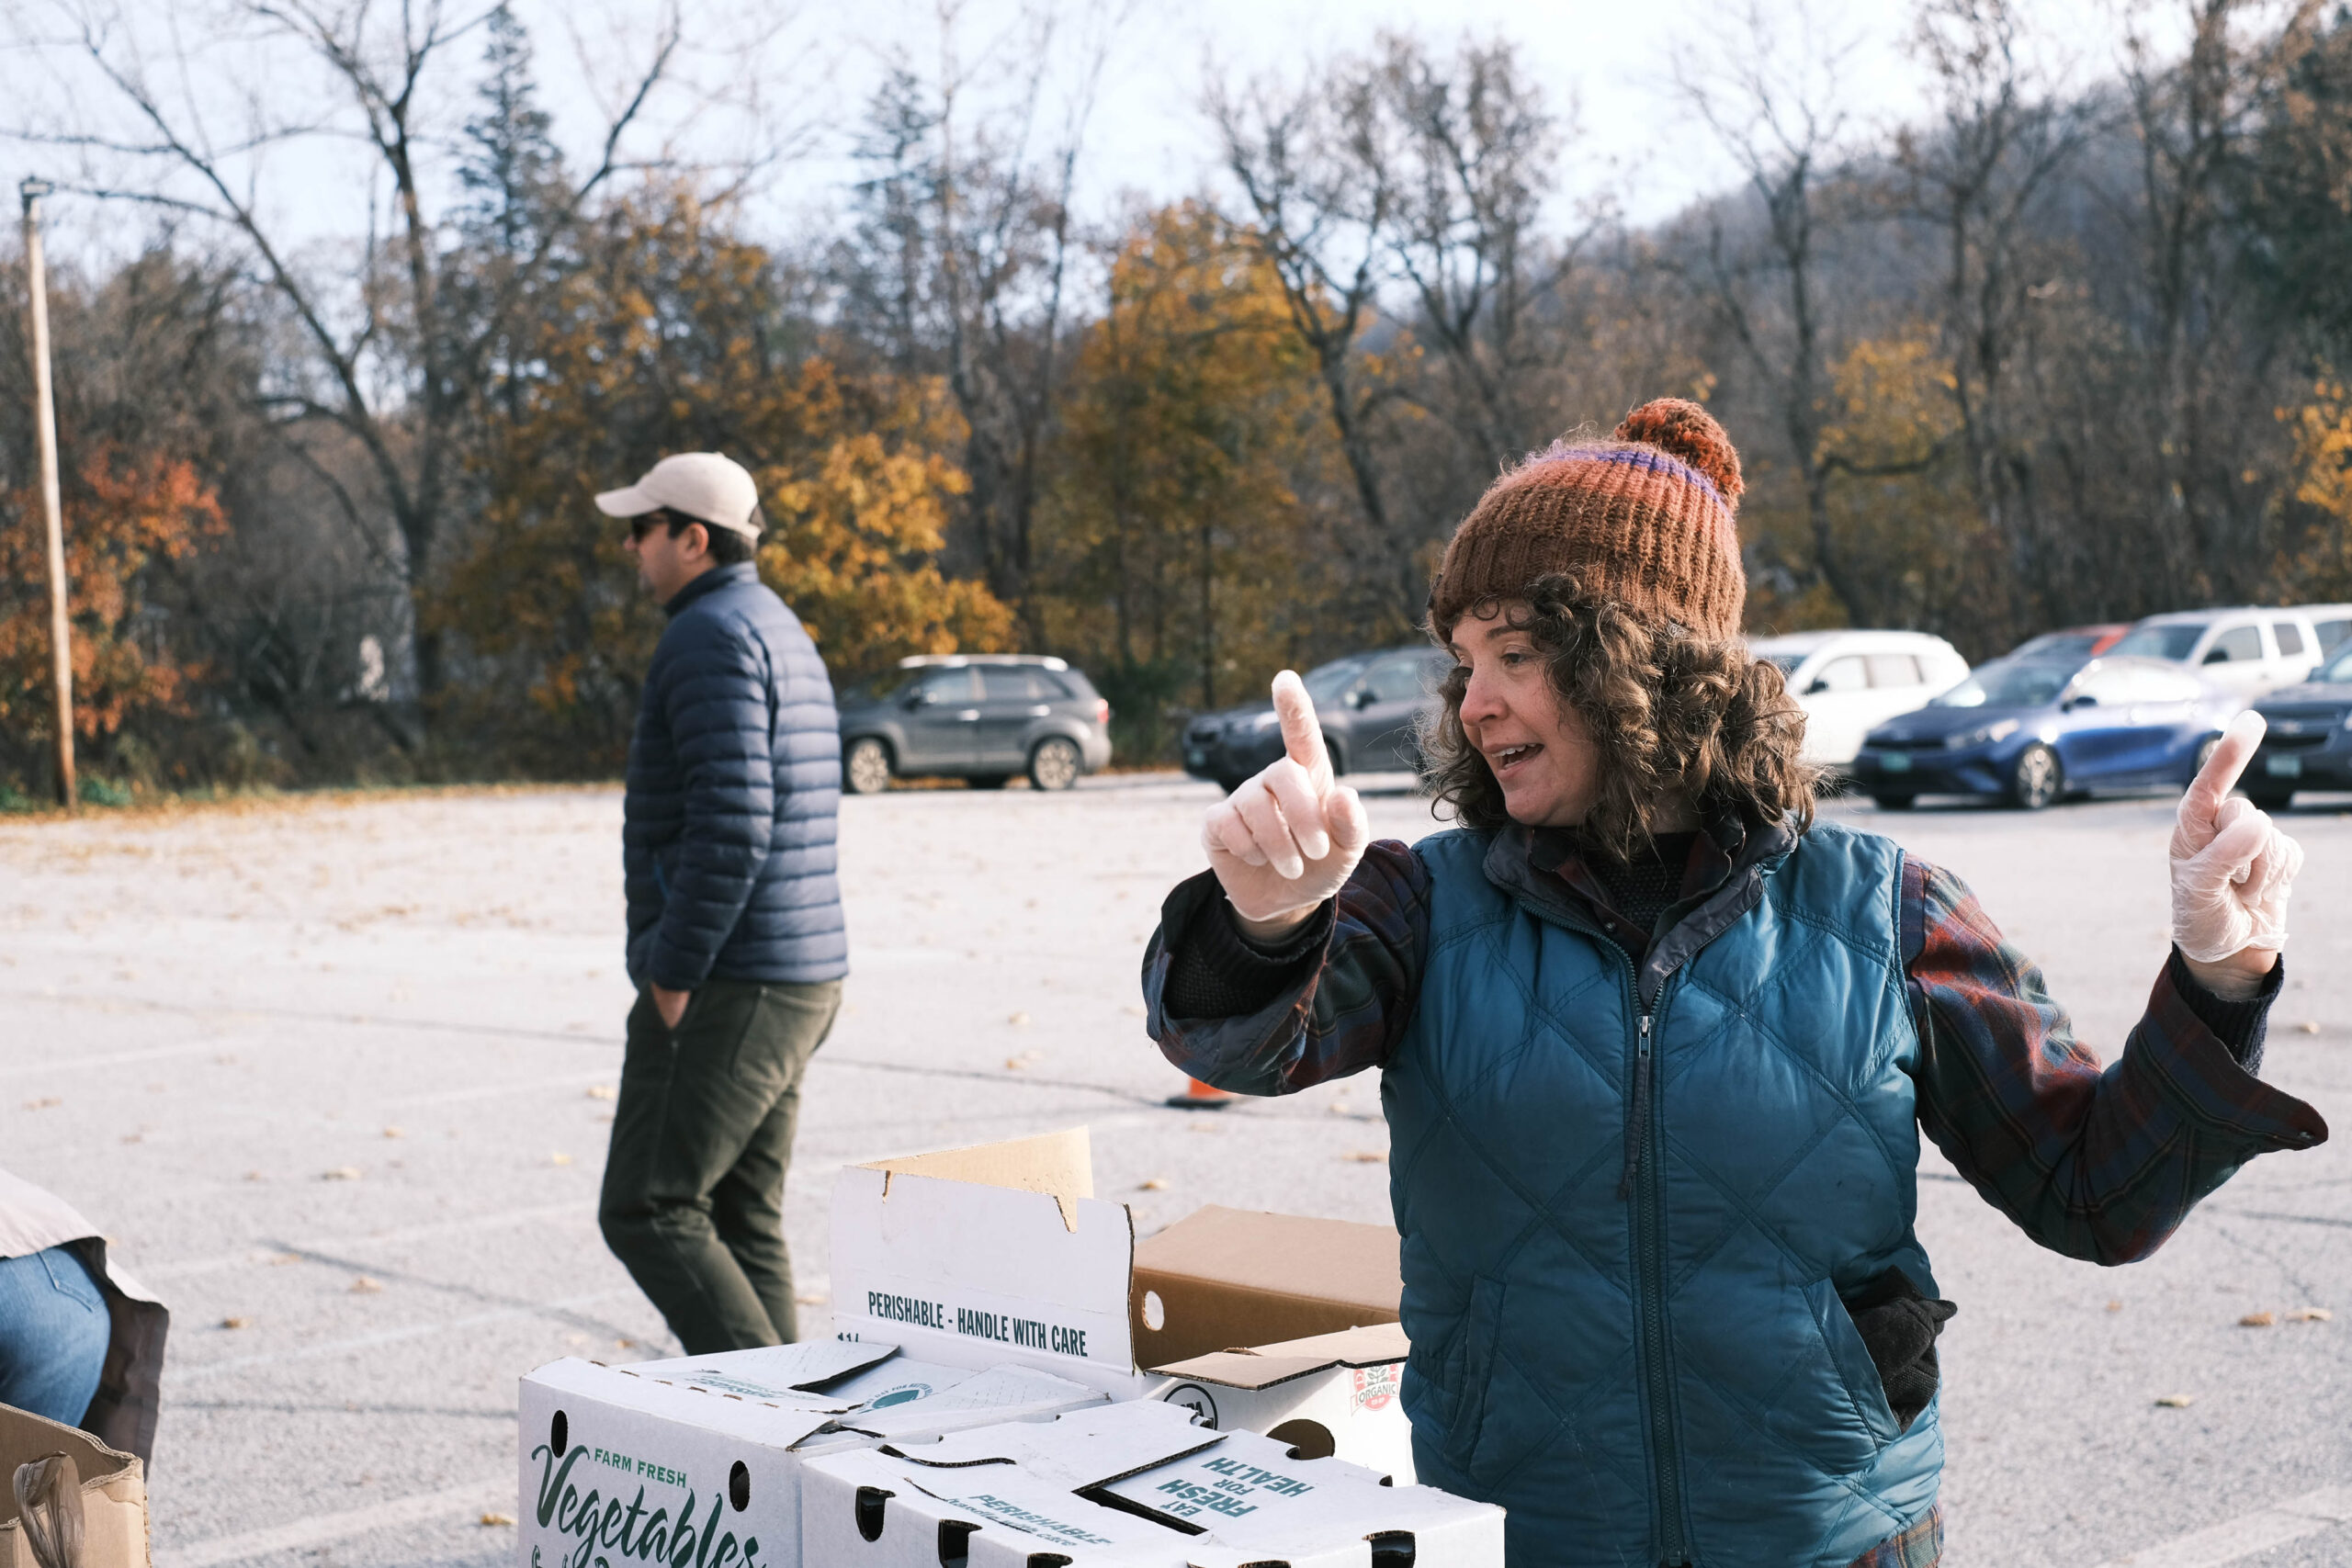 A Vermont Foodbank staff member directs traffic at a produce distribution event in Barre, Vermont.